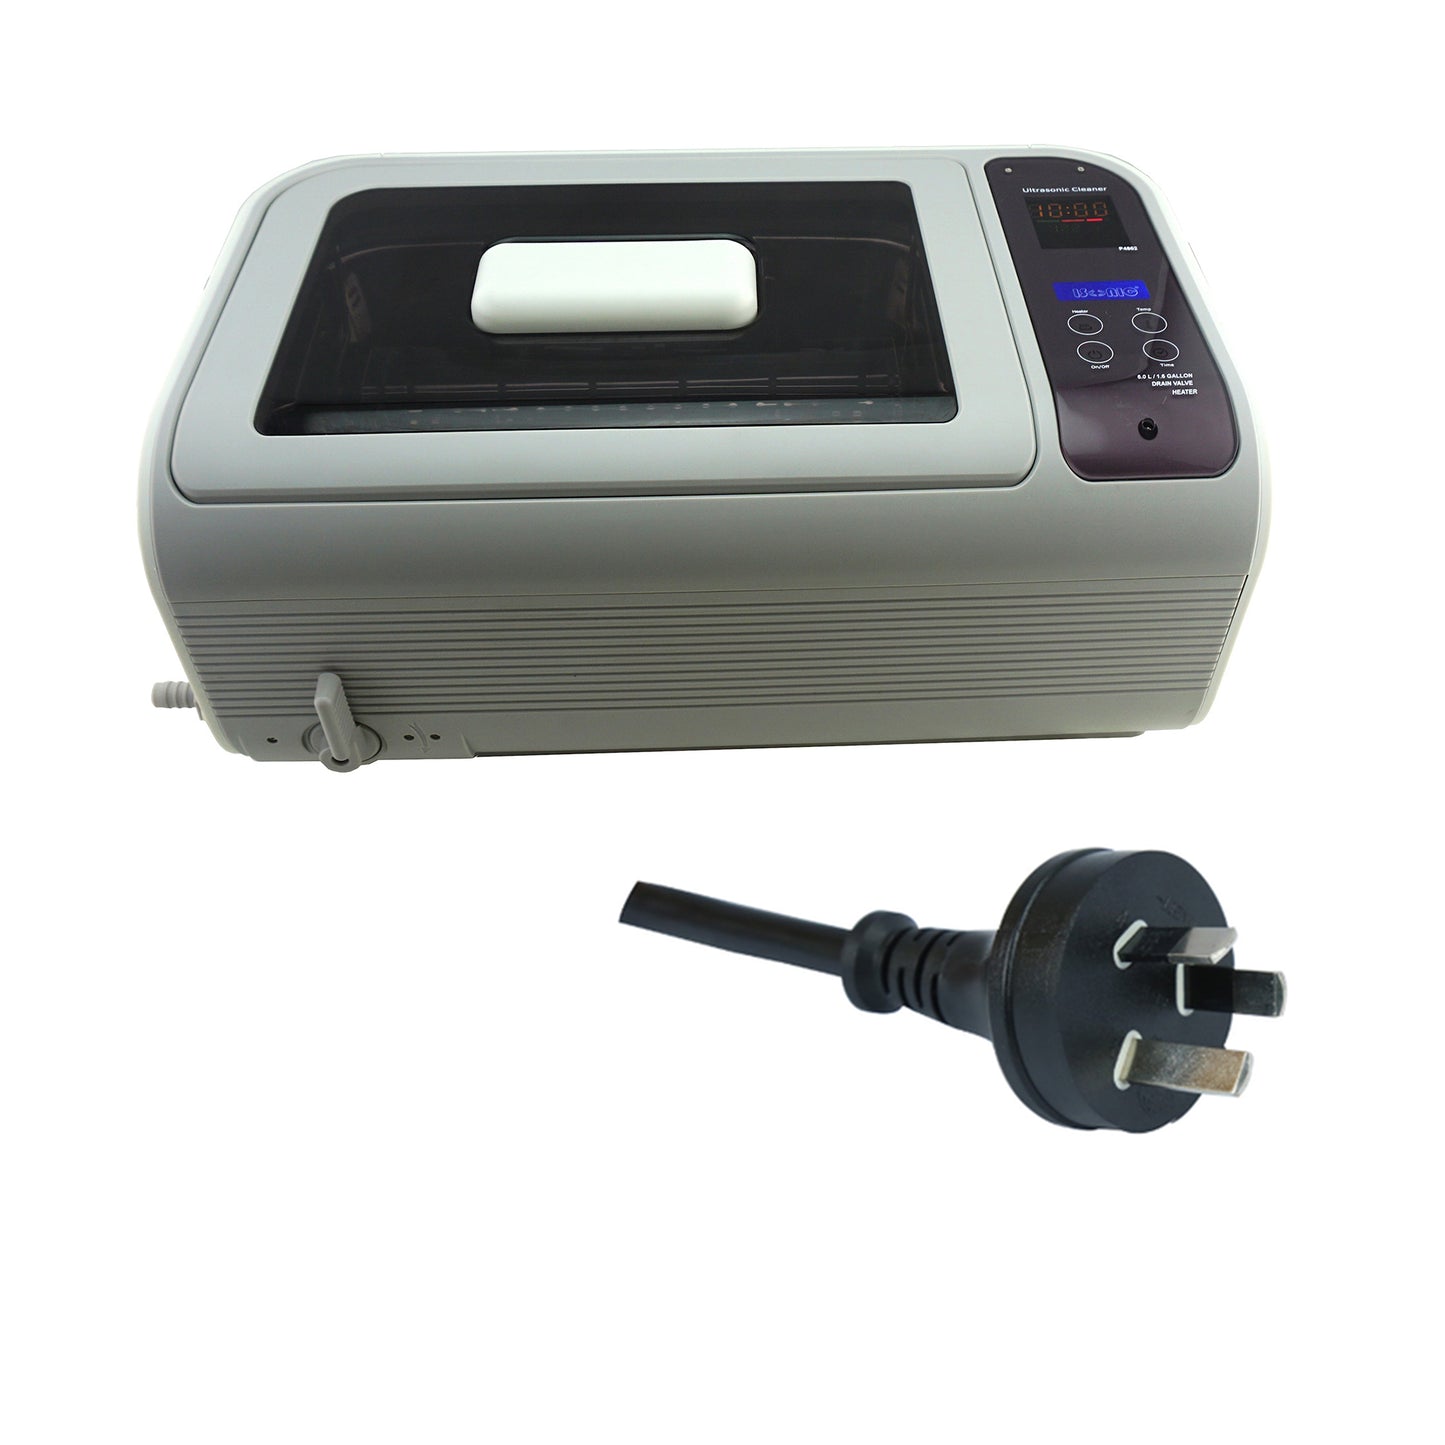 P4862-NH | iSonic® Ultrasonic Cleaner, 6L/1.6Gal, 110V, 30-minute timer, no heaters, with stainless steel basket (Dentists please choose P4861-NH)